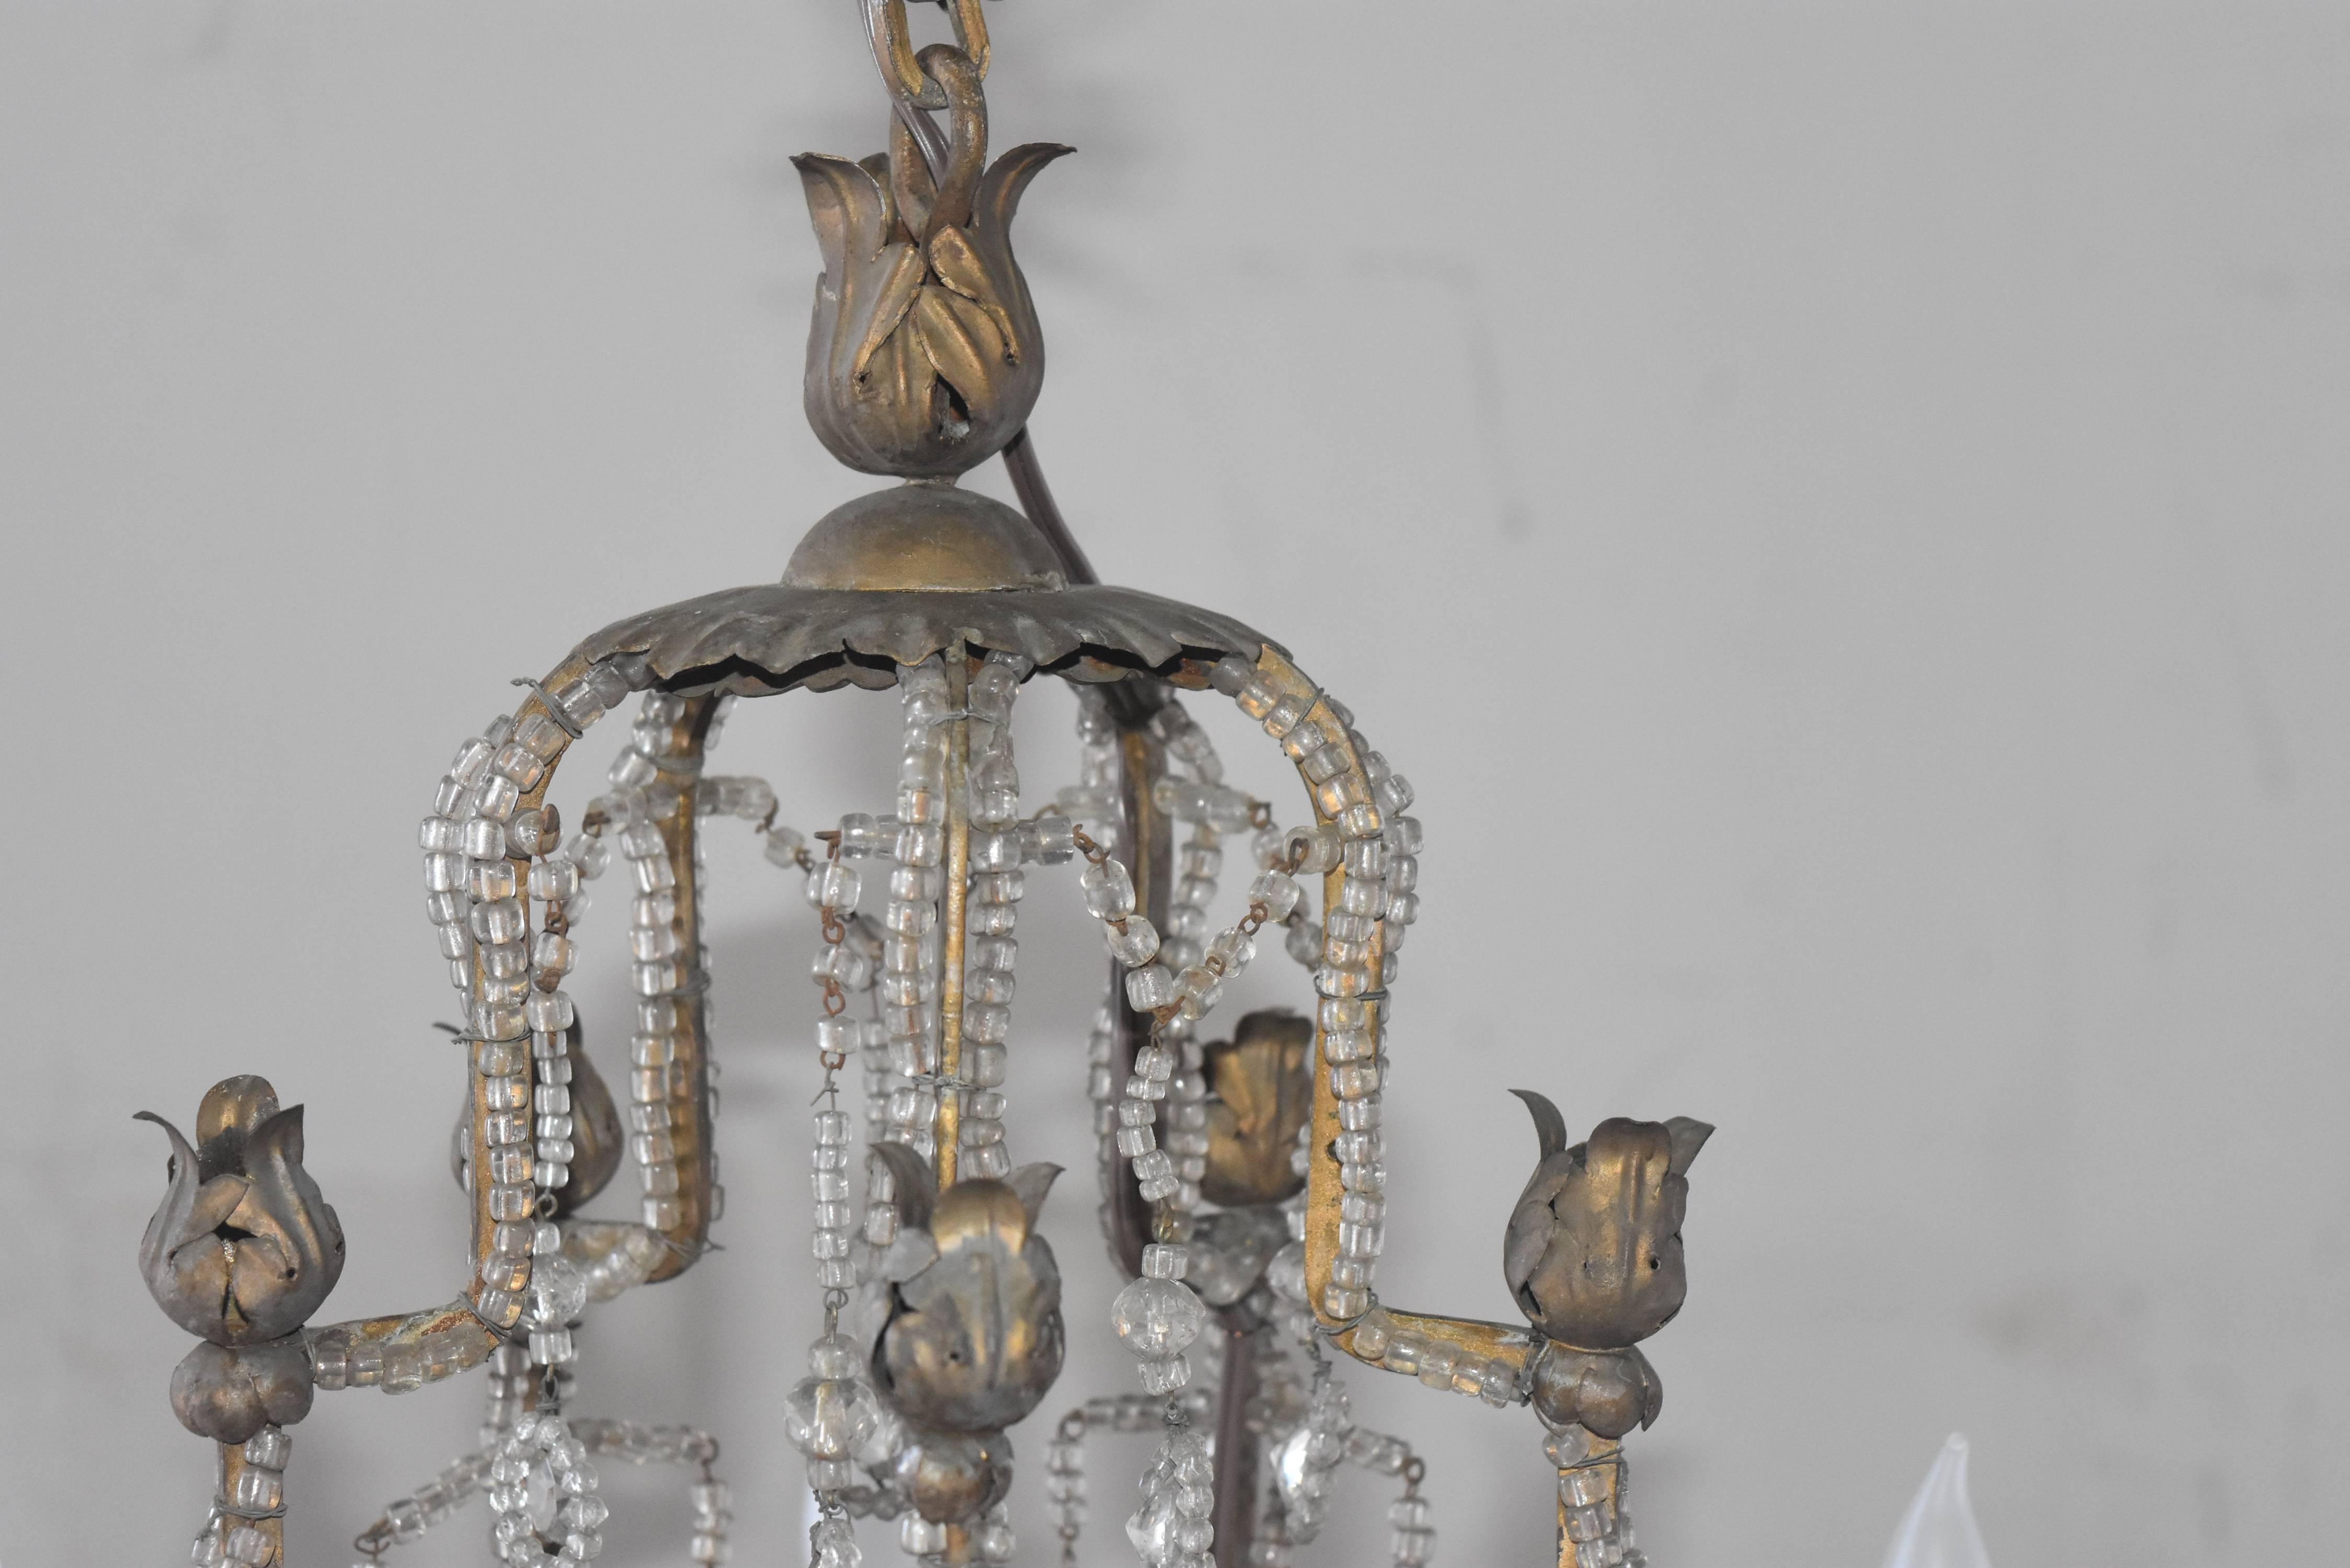 19th Century Italian Beaded Metal Crystal Chandelier with Floral Metal Bobeshes 6